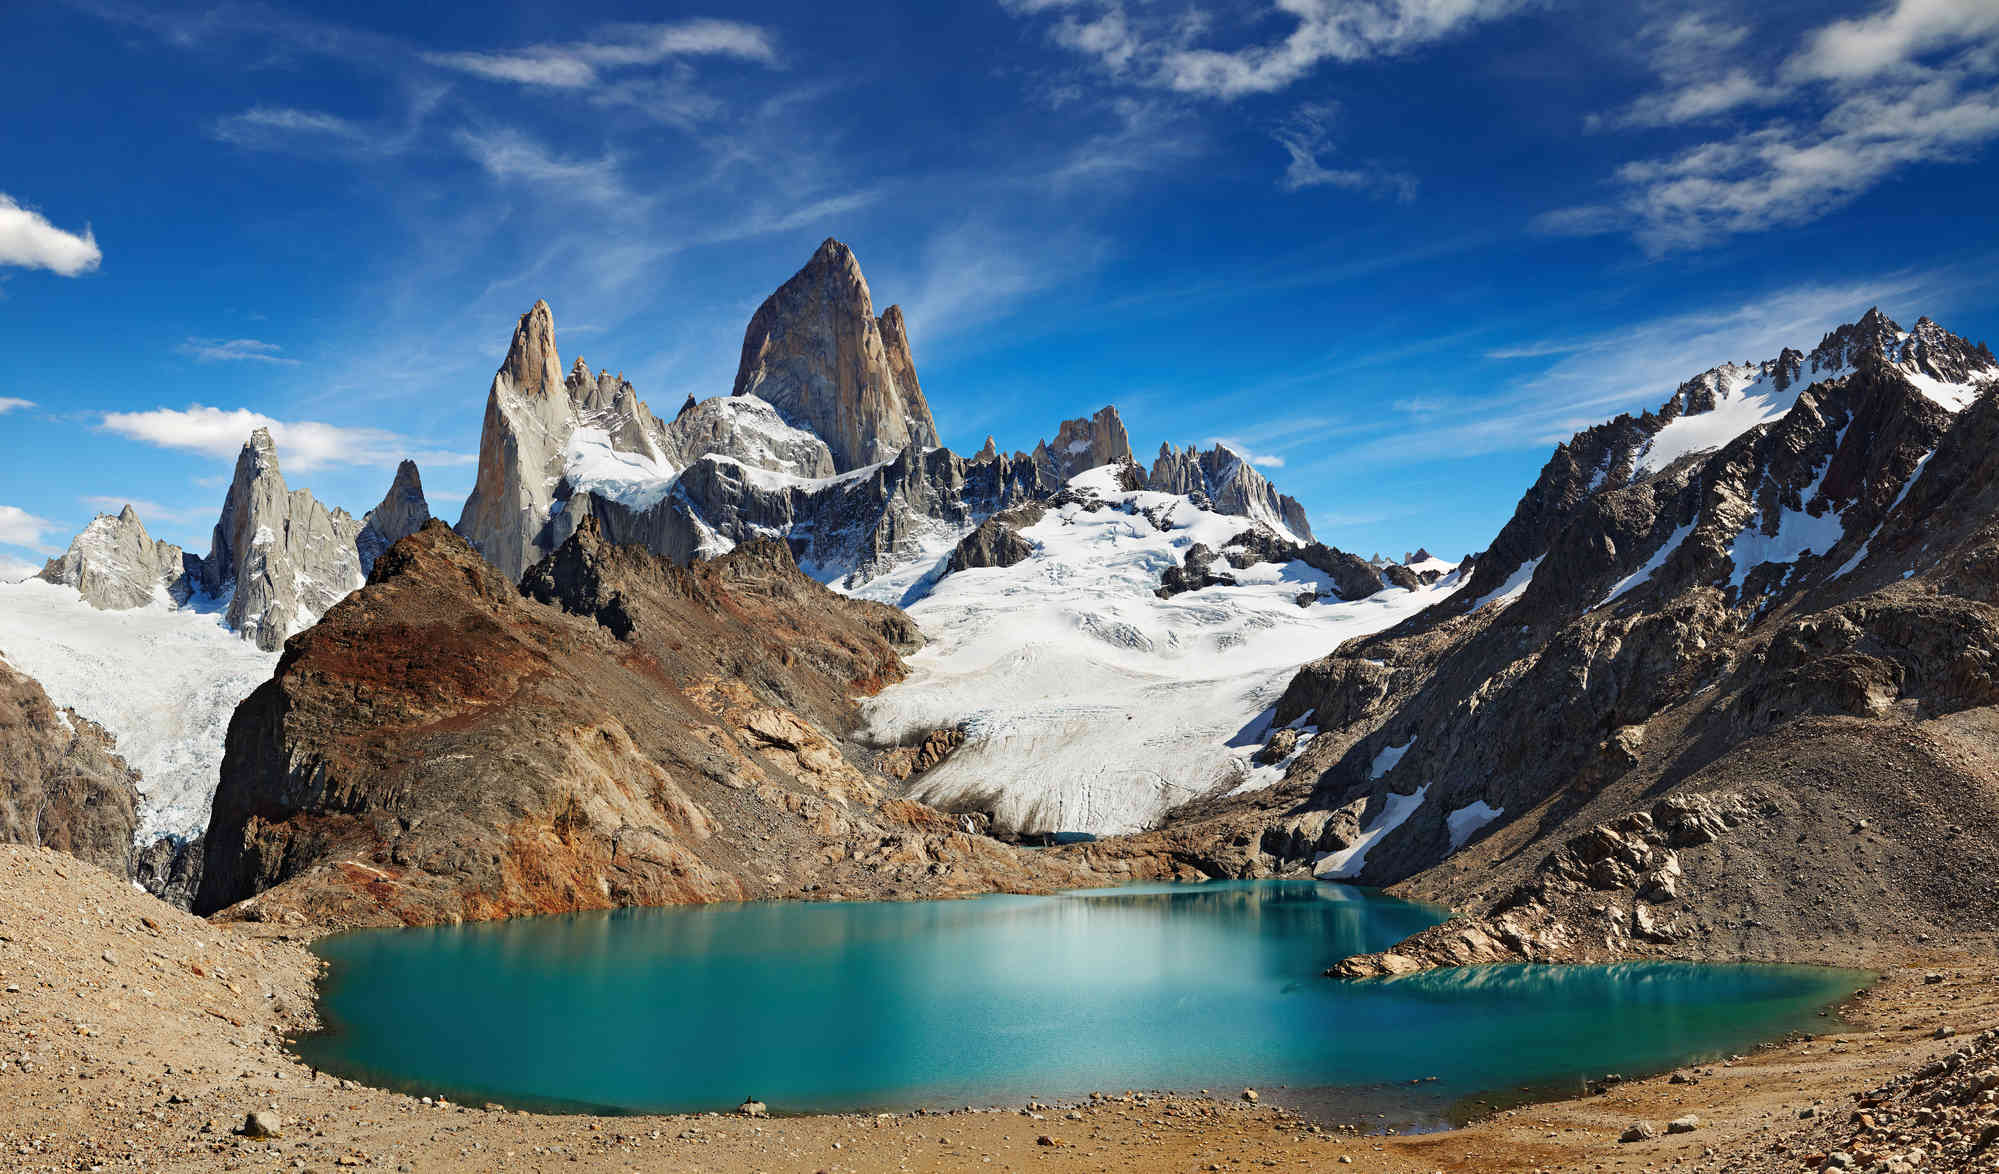 crossing the varied landscapes of Patagonia